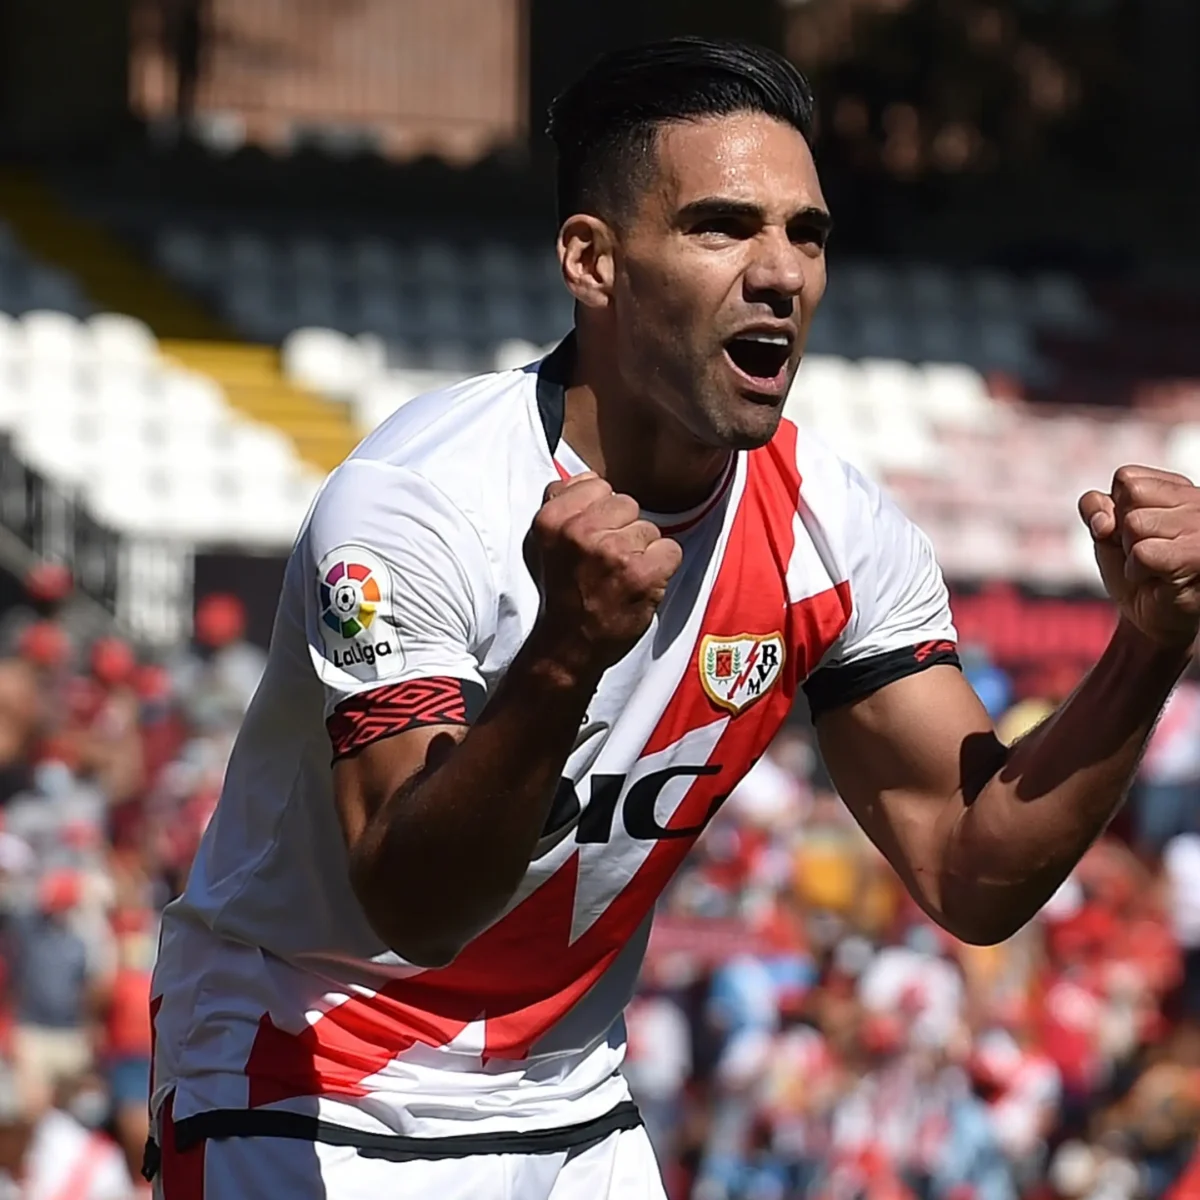 Radamel Falcao: Nearing the End of his Spanish Journey